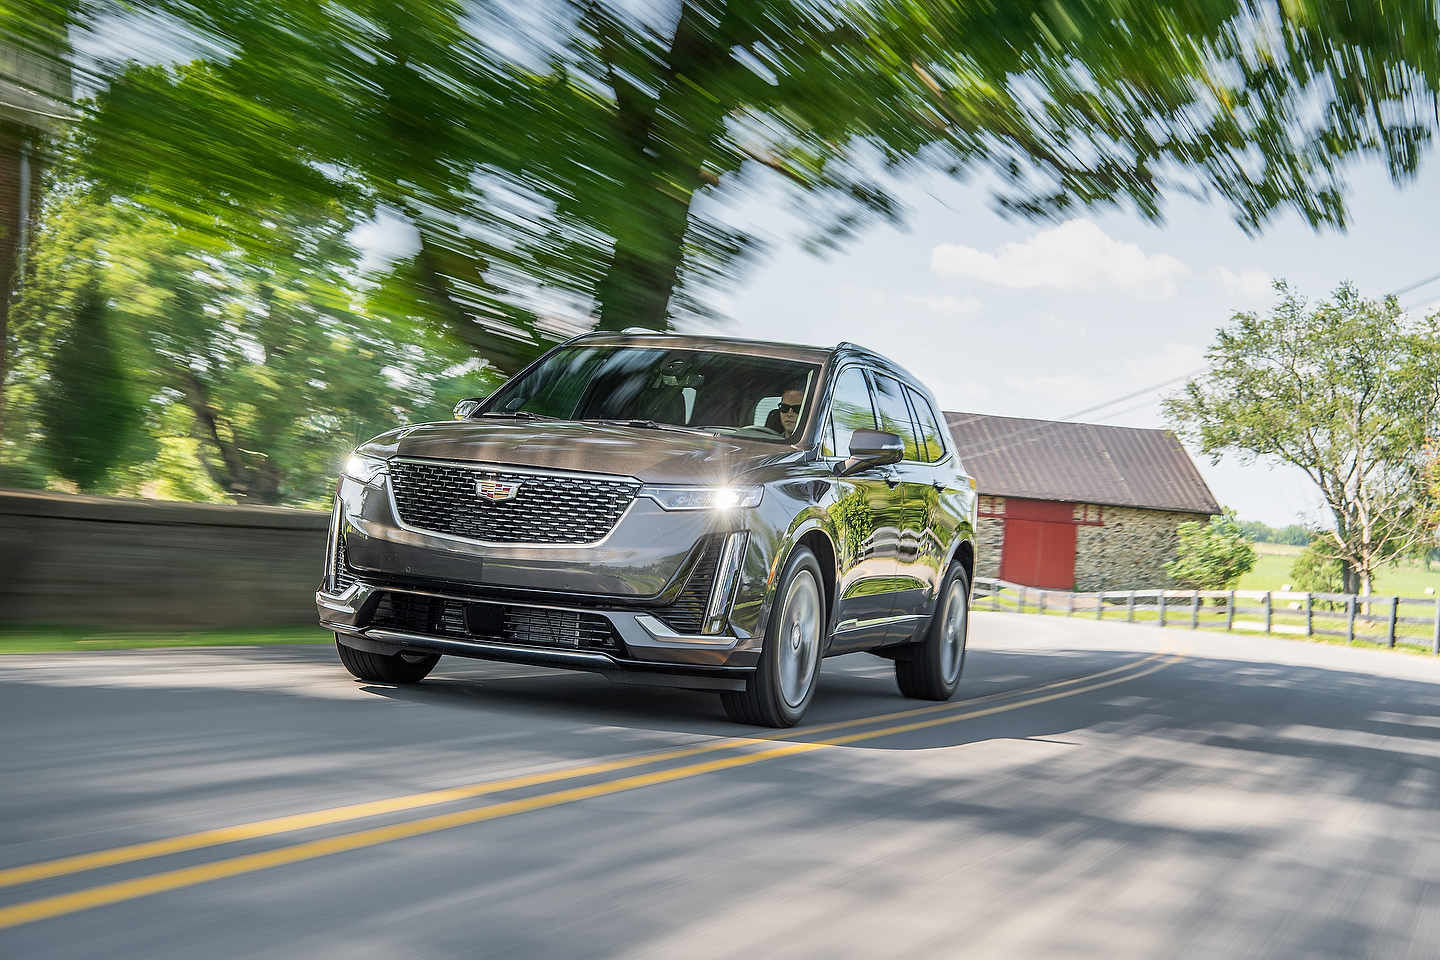 Pre-owned Cadillac XT6s: Why You Should Consider Buying One